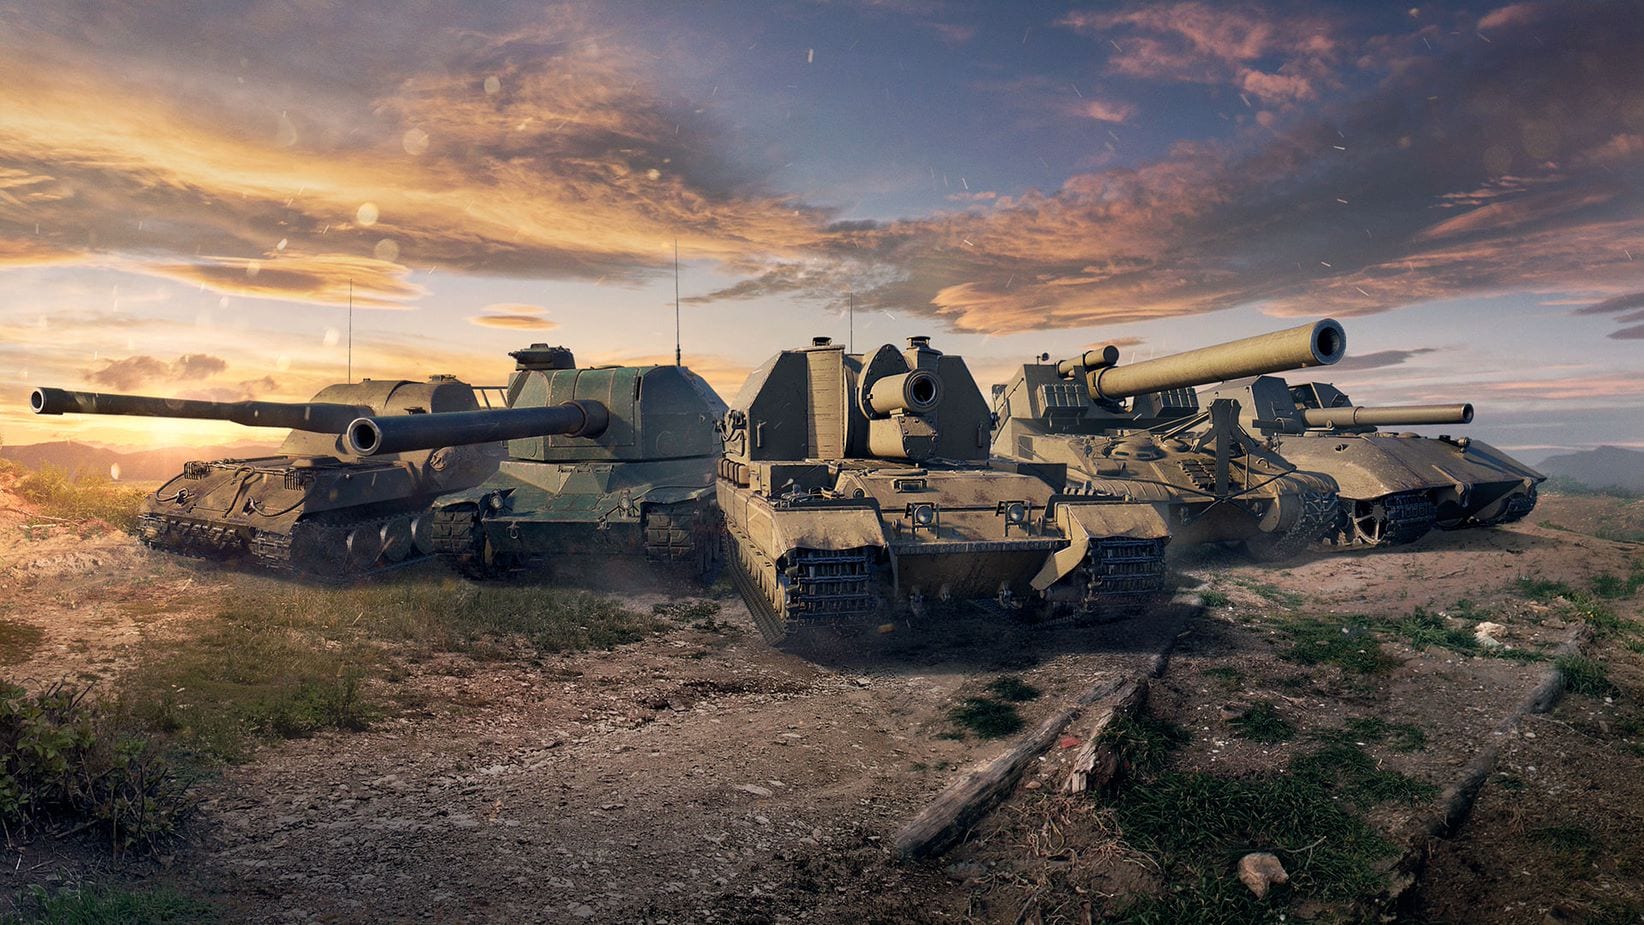 World Of Tanks Update 1.13 Brings New Features And Changes